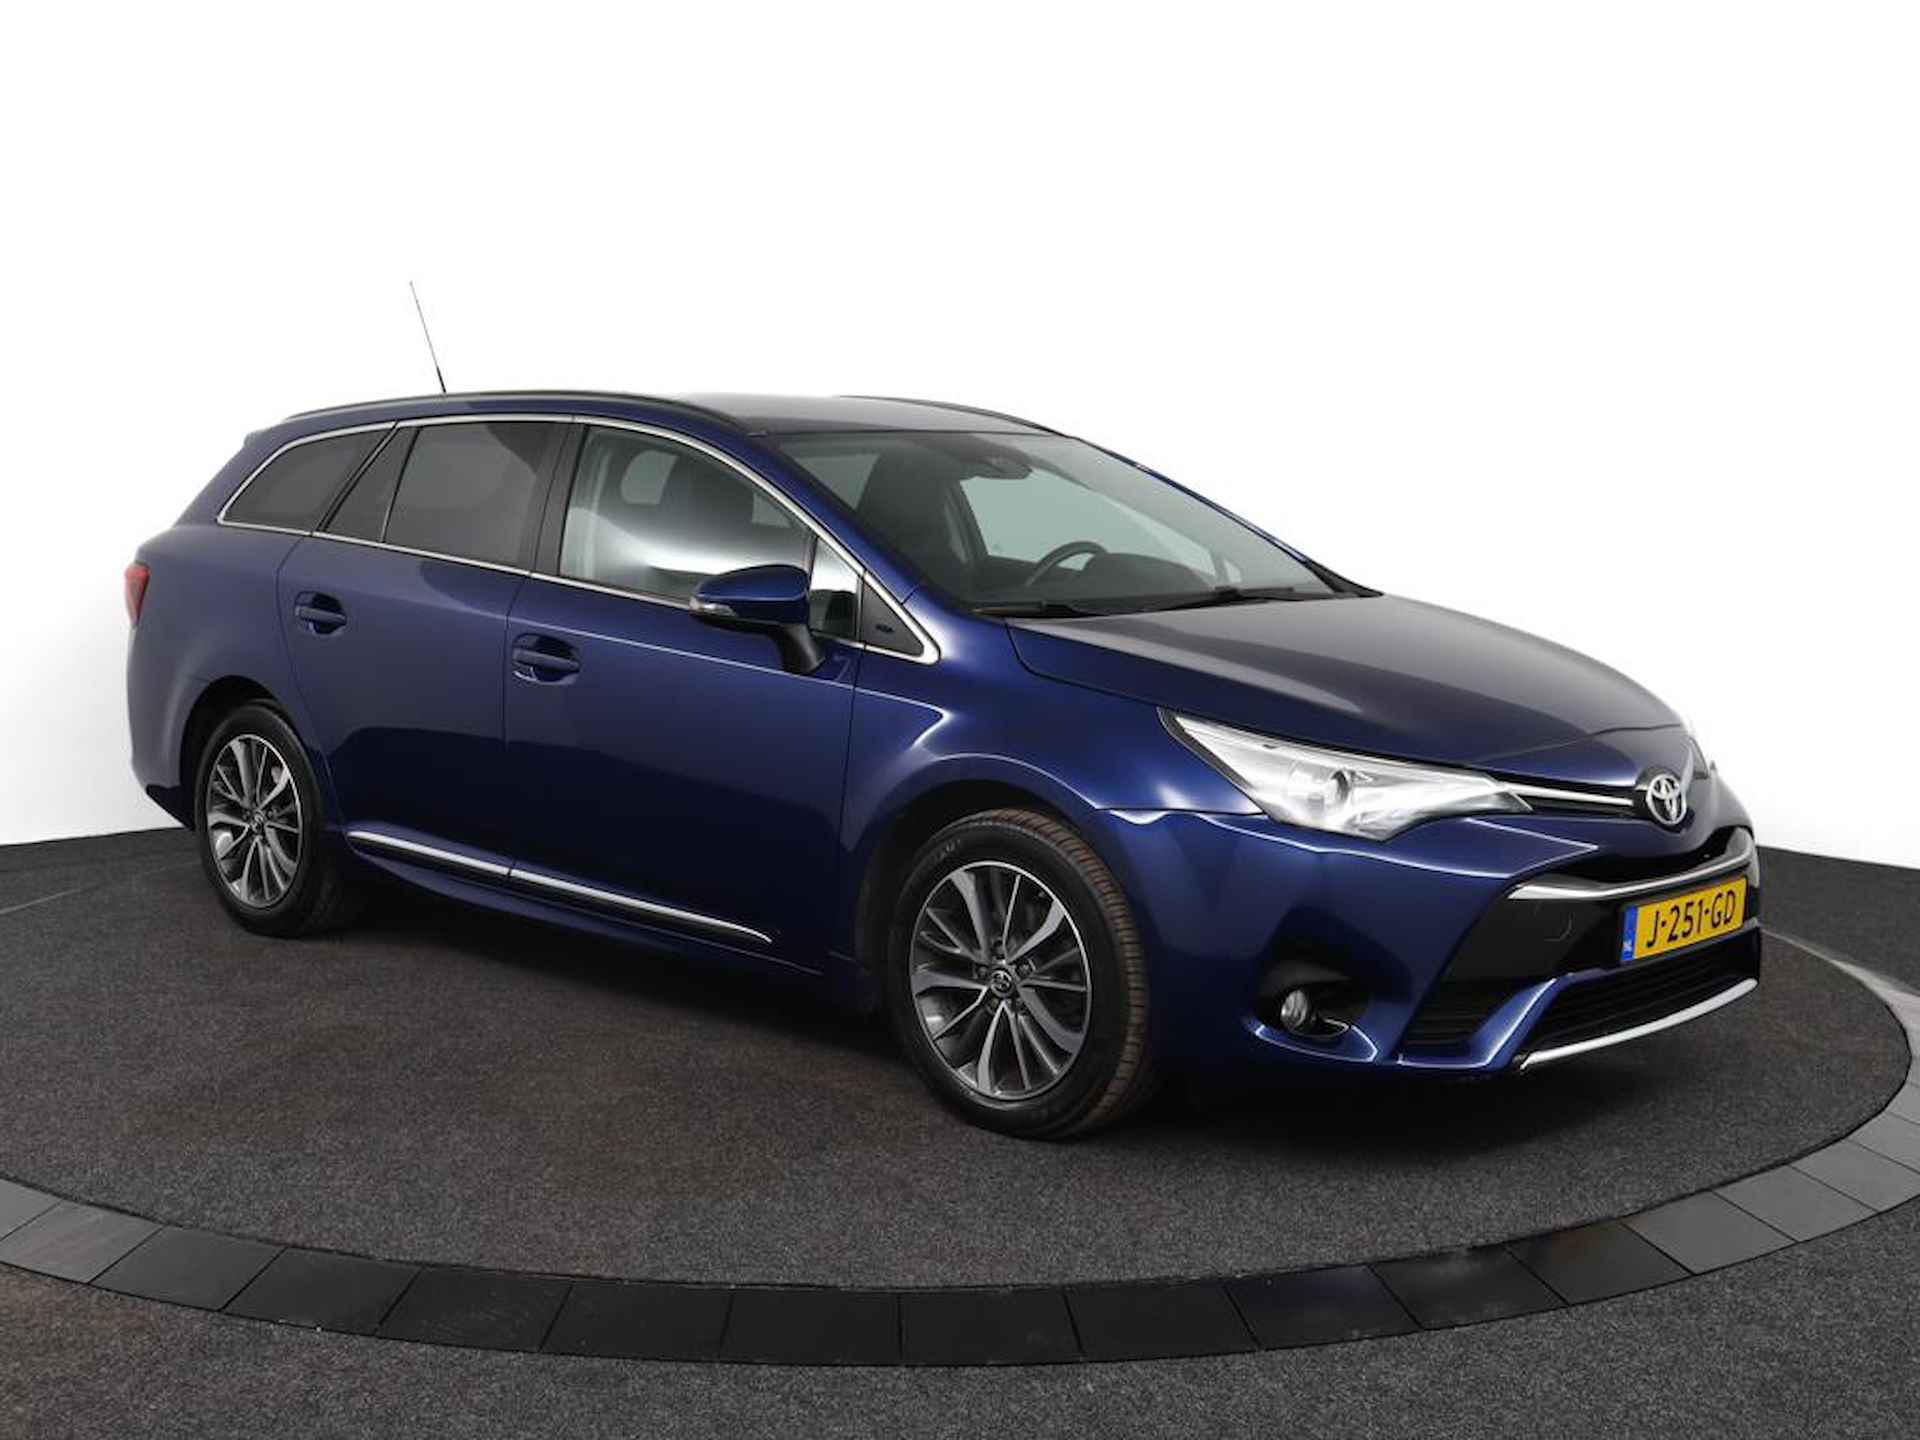 Toyota Avensis Touring Sports 1.8 VVT-i Executive |Camera|Stoelver|Nette staat| - 7/28